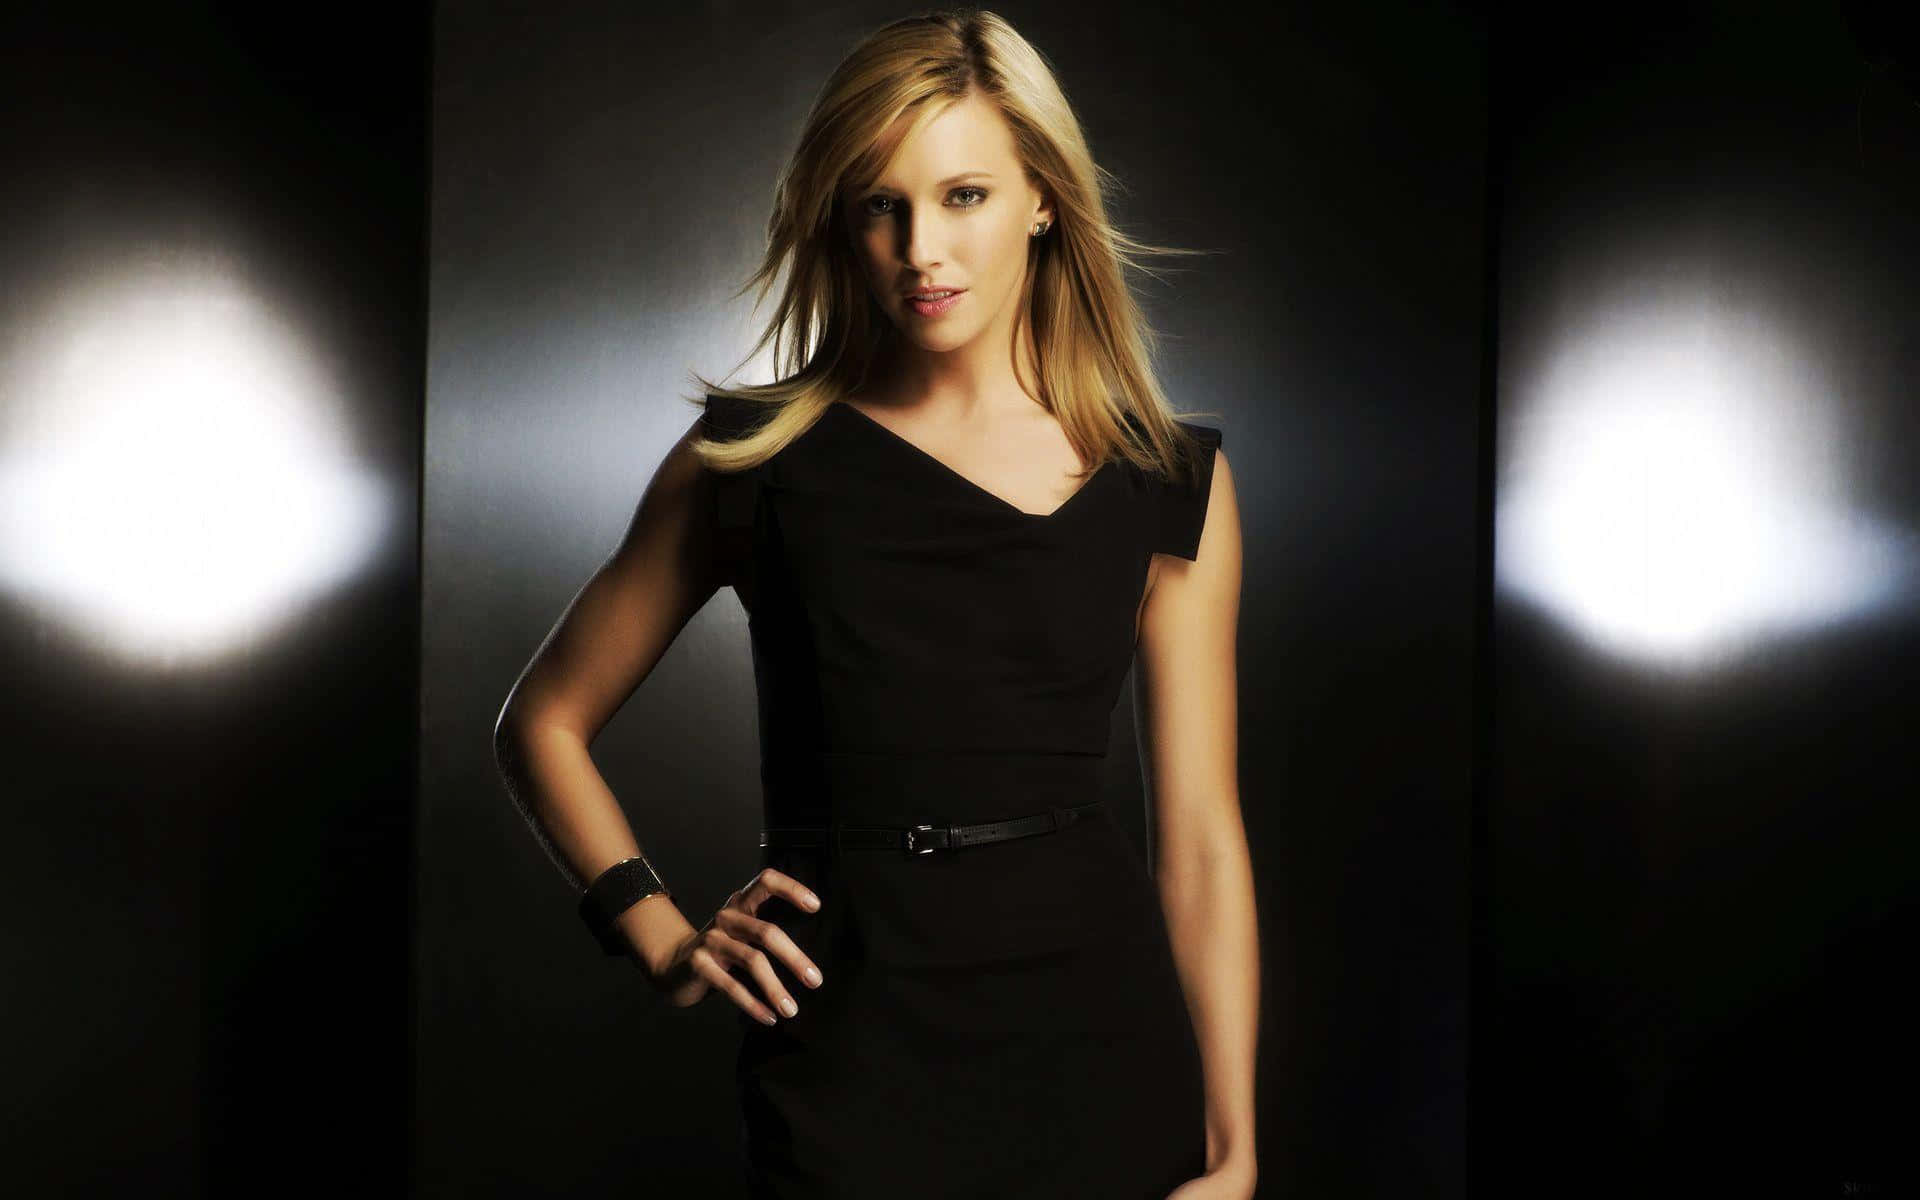 Katie Cassidy Posing In An Elegant Outfit Background